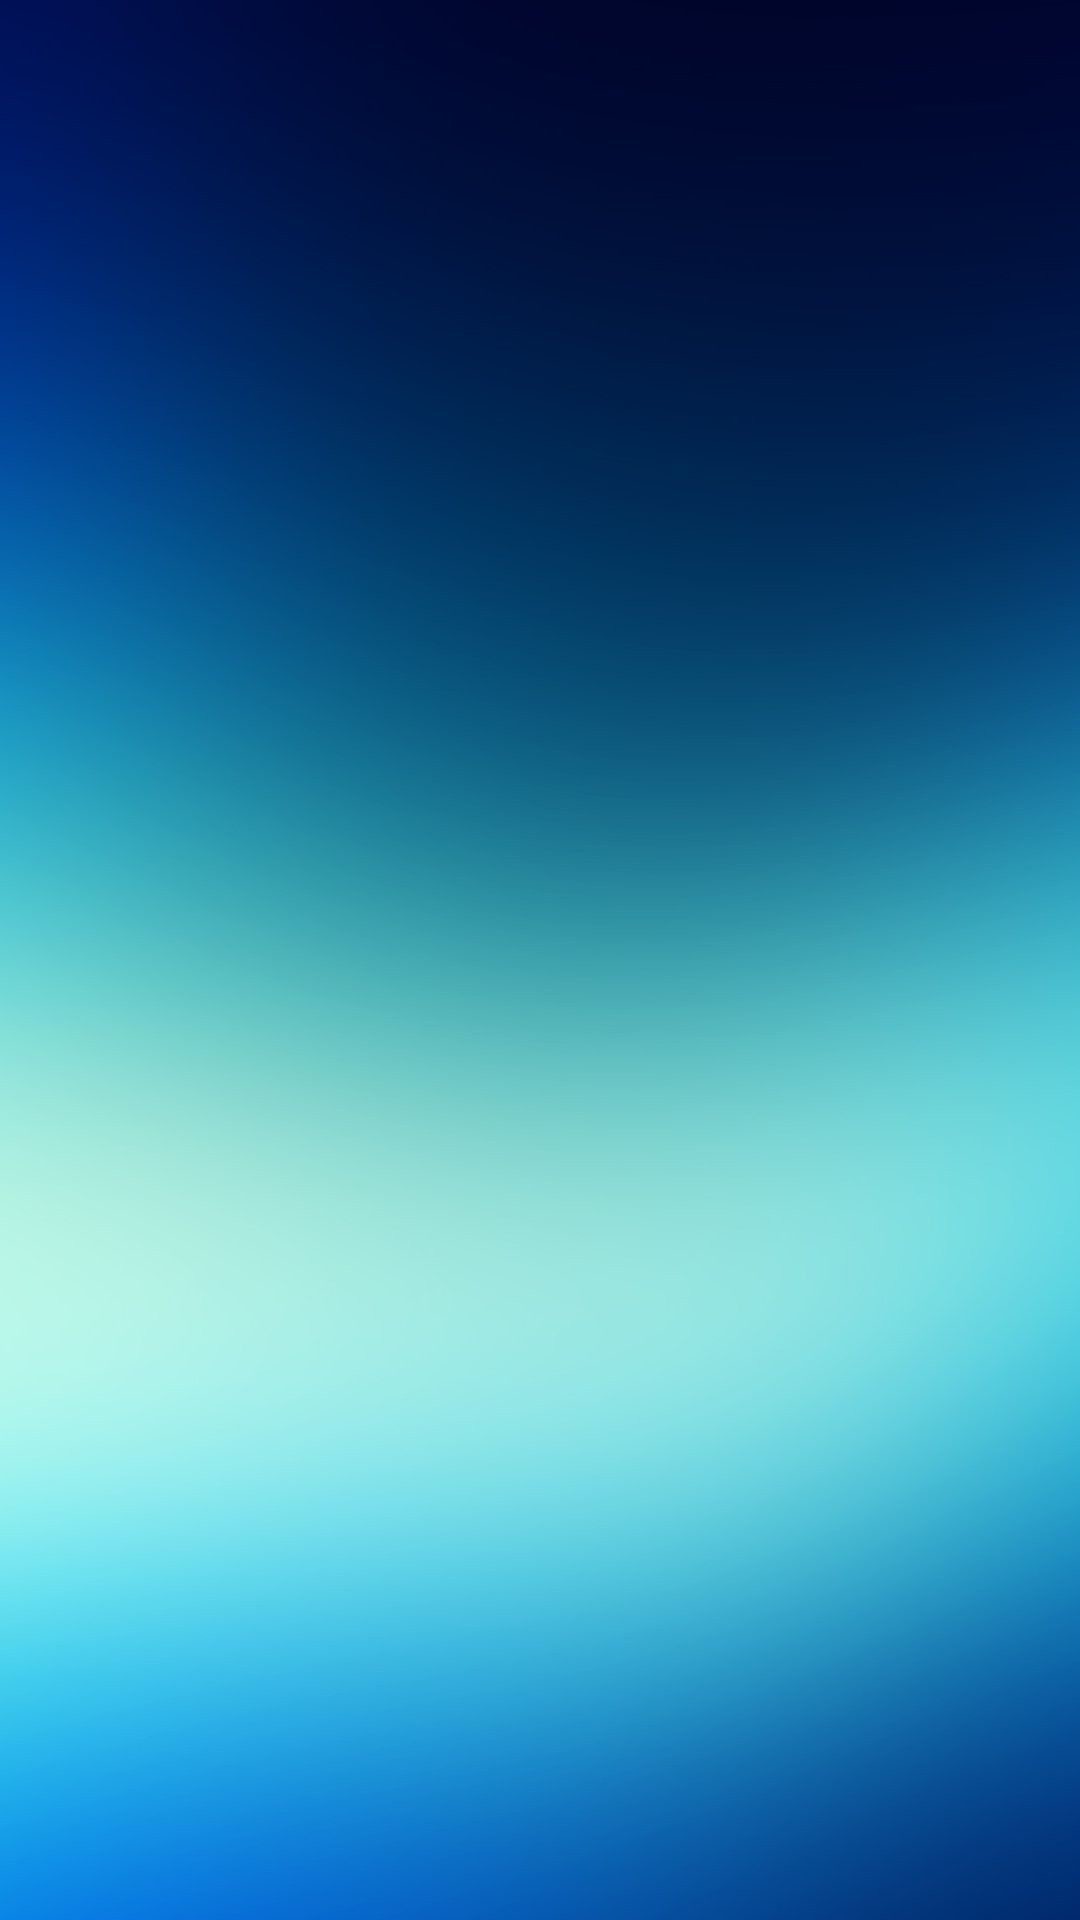 1080x1920  Blue Blur iPhone 6 Plus Wallpaper 26343 - Abstract iPhone 6 Plus  Wallpapers